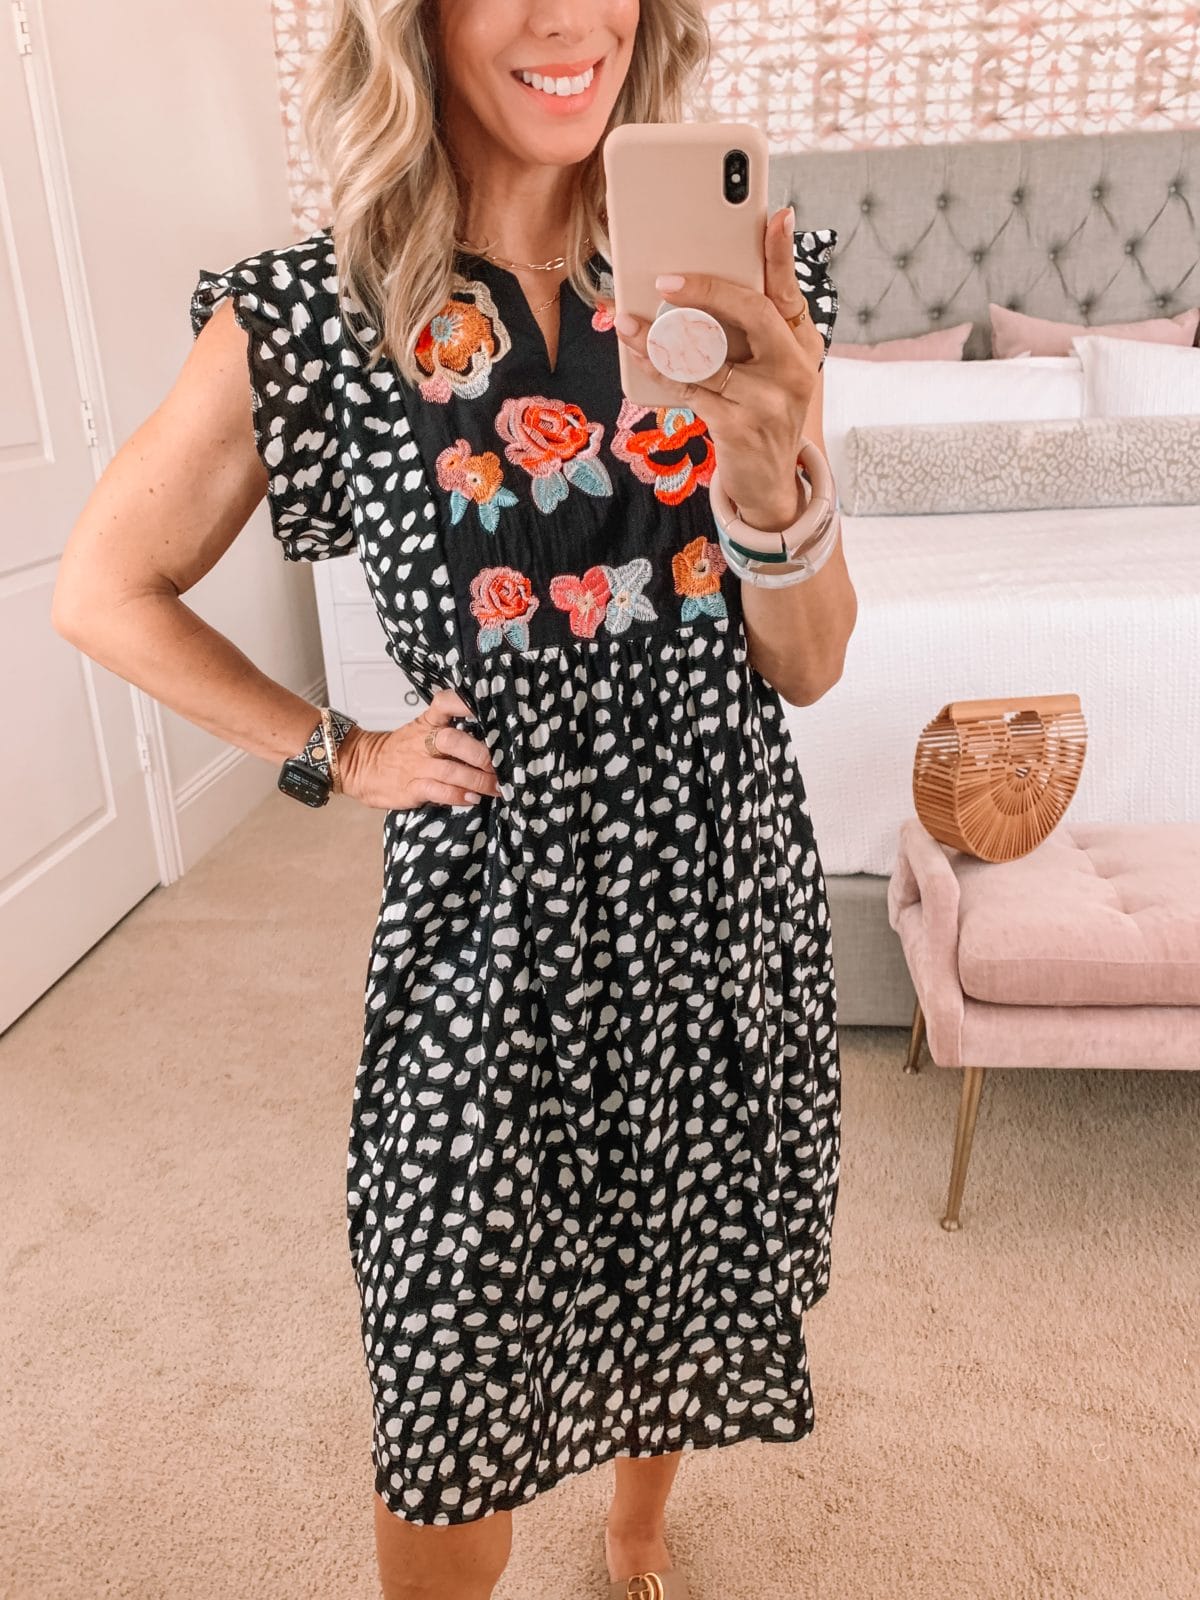 Amazon Fashion Faves, Polka Dot Embroidered Dress and Sandals 